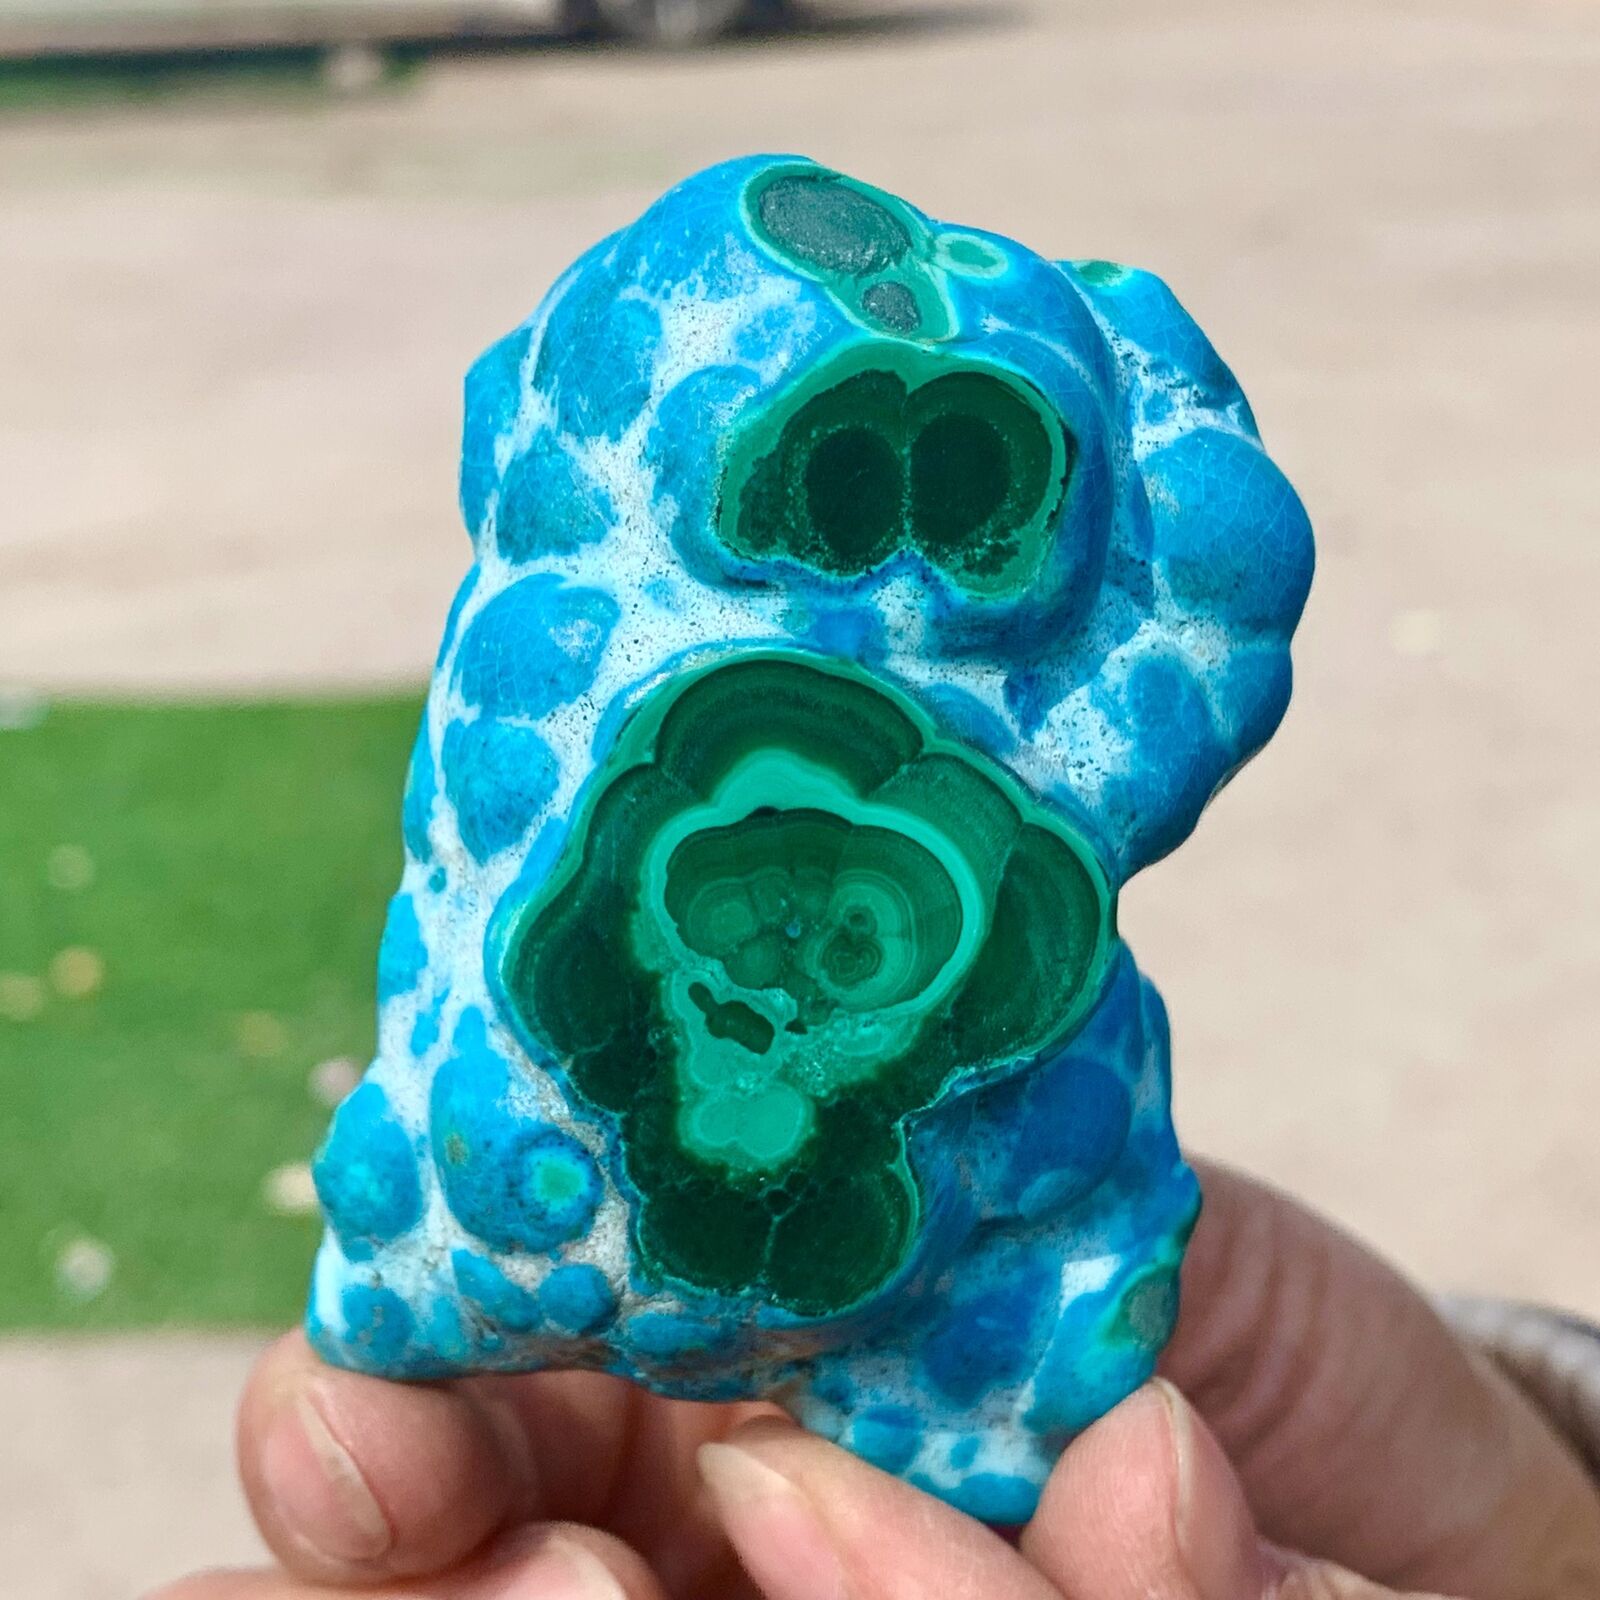 124G Natural Chrysocolla/Malachite transparent cluster rough mineral sample